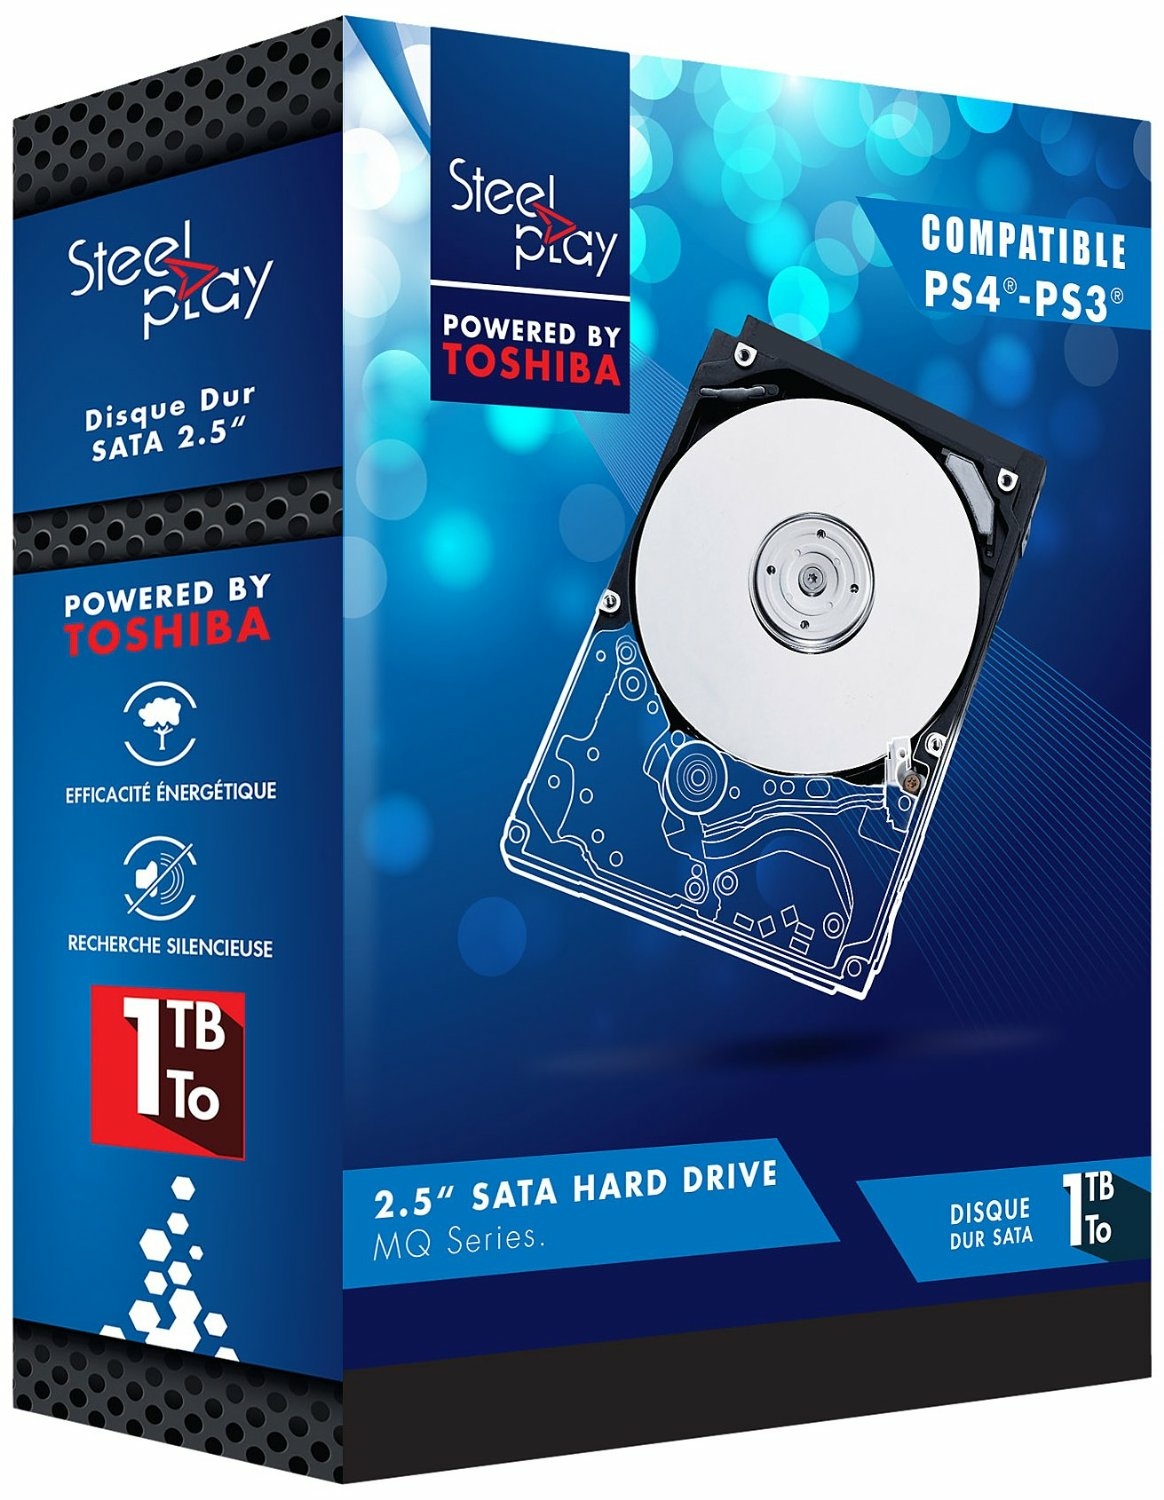 Disque Dur 500 Go pour PS4 / PS3 By Toshiba + Support